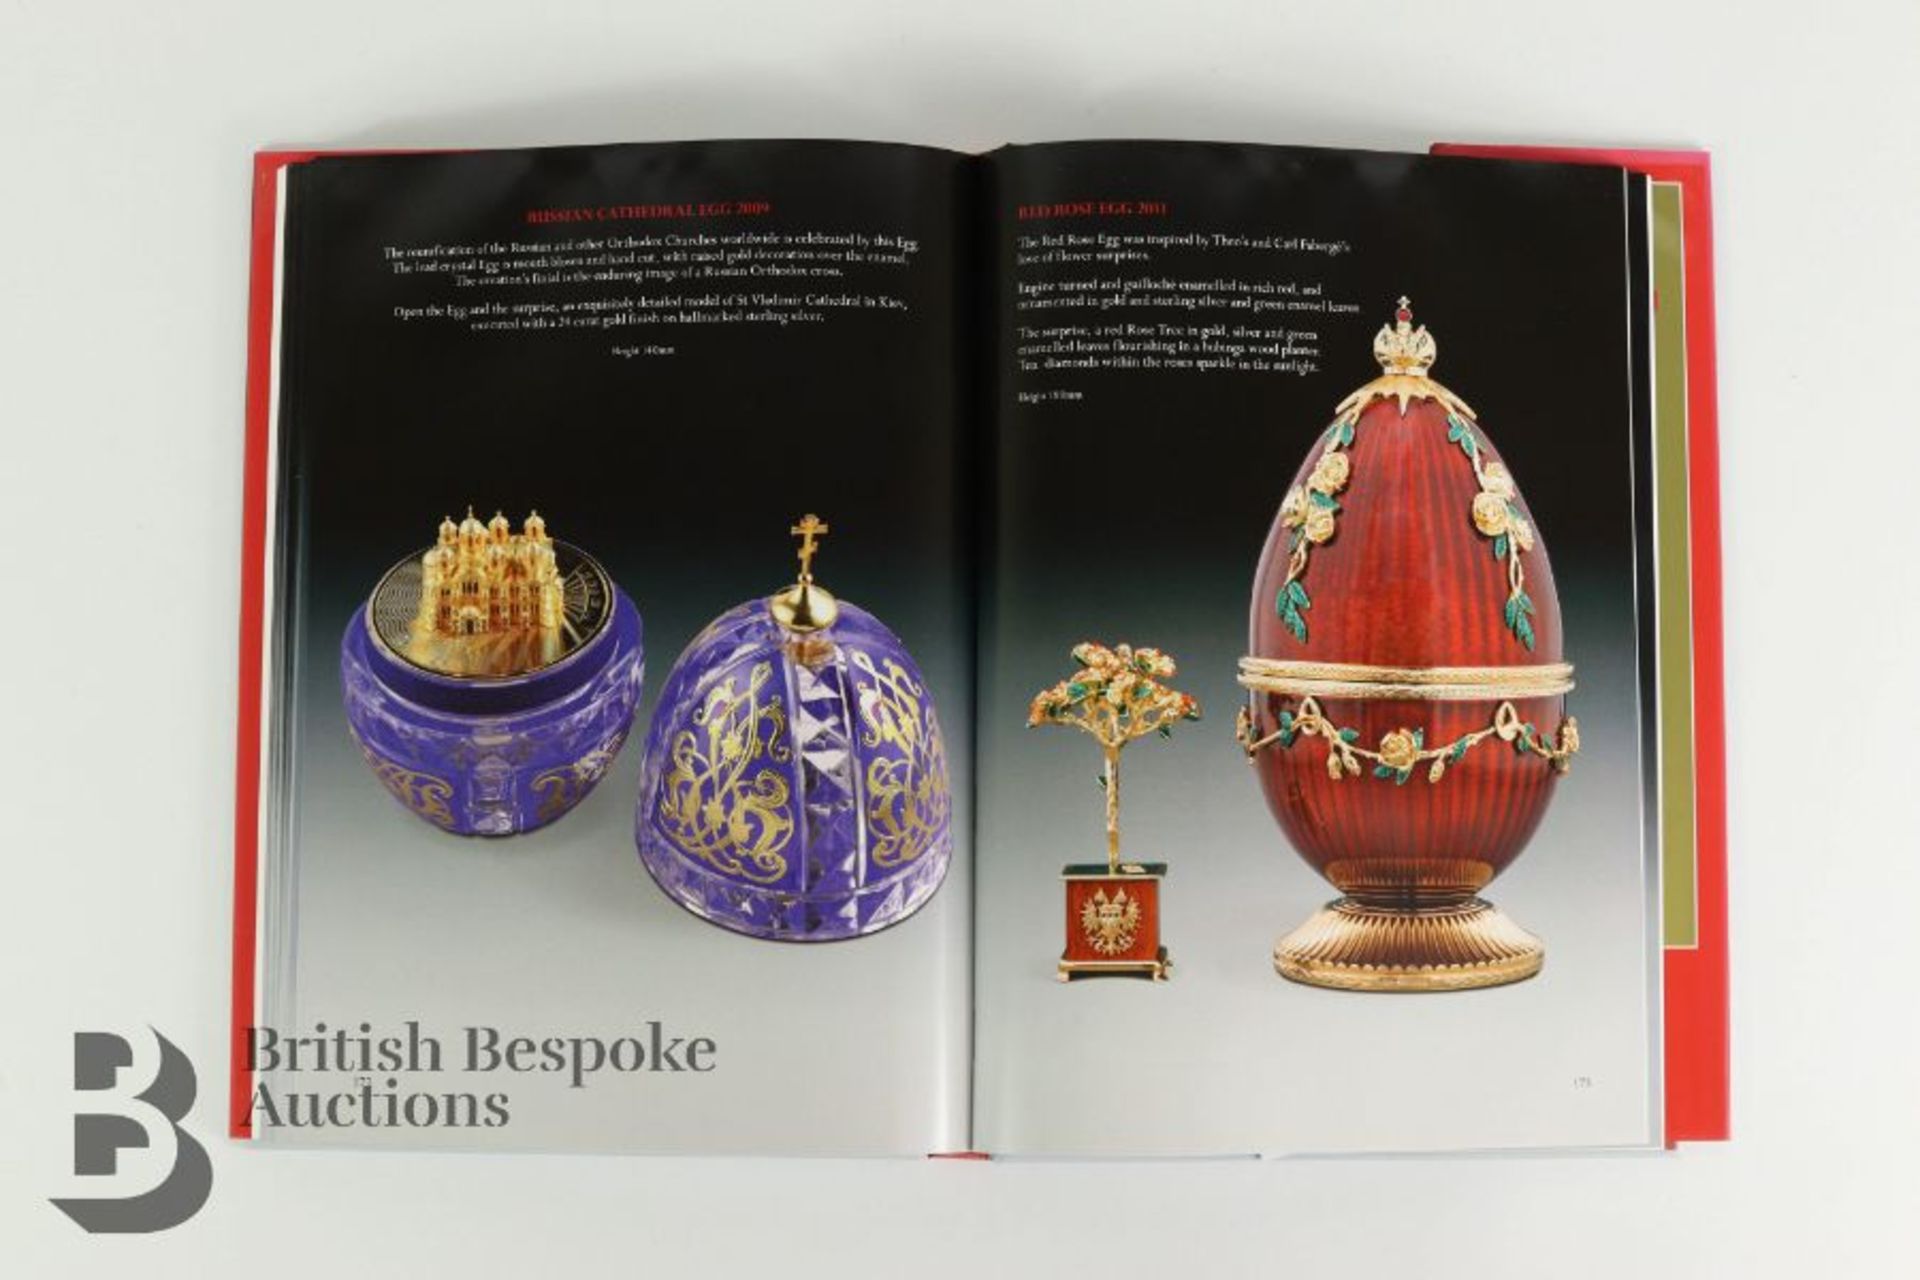 Theo Faberge Anichkov Egg - St Petersburg Collection - Image 36 of 37